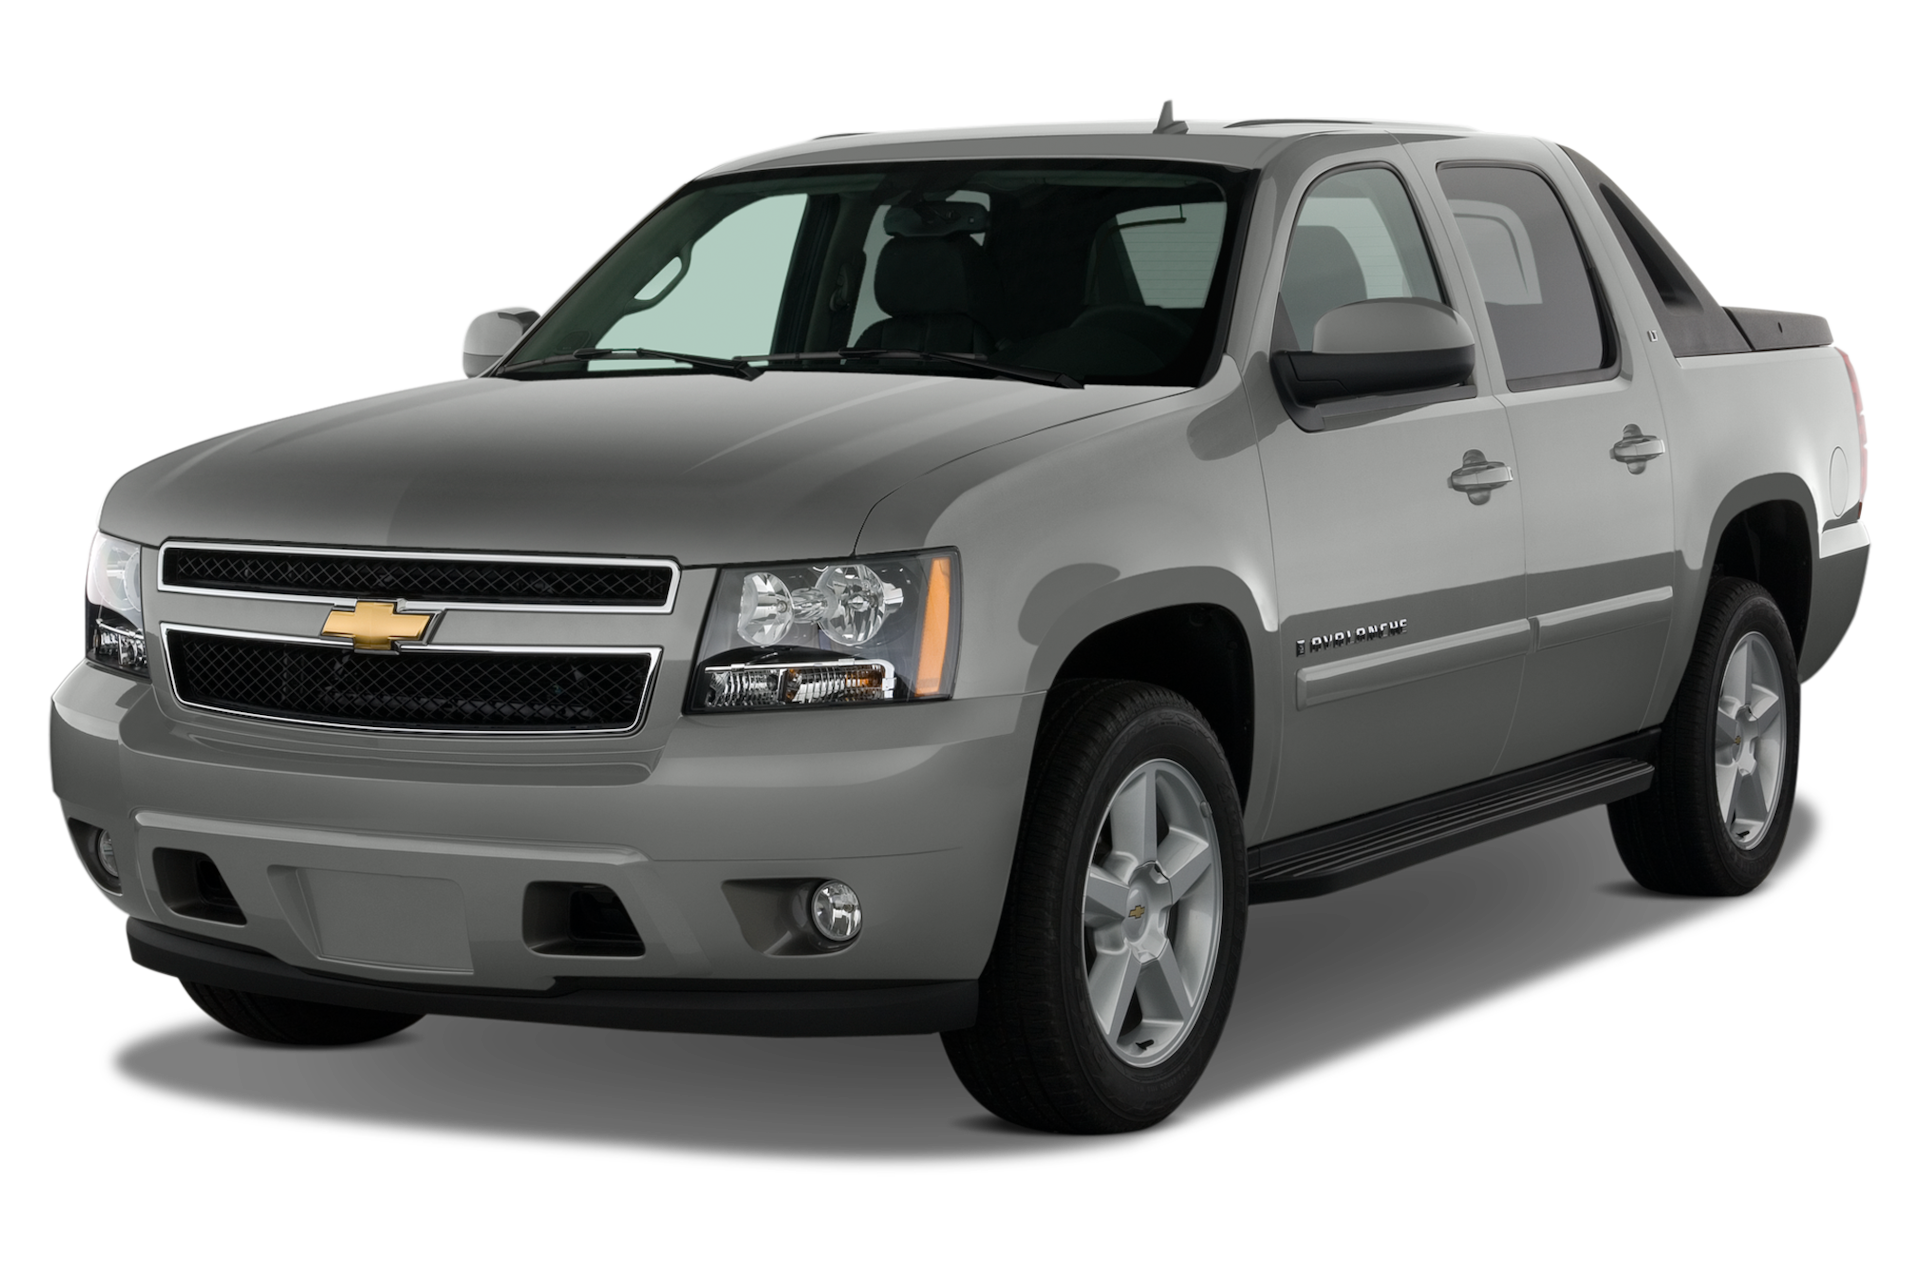 2012 Chevrolet Avalanche Prices, Reviews, and Photos - MotorTrend